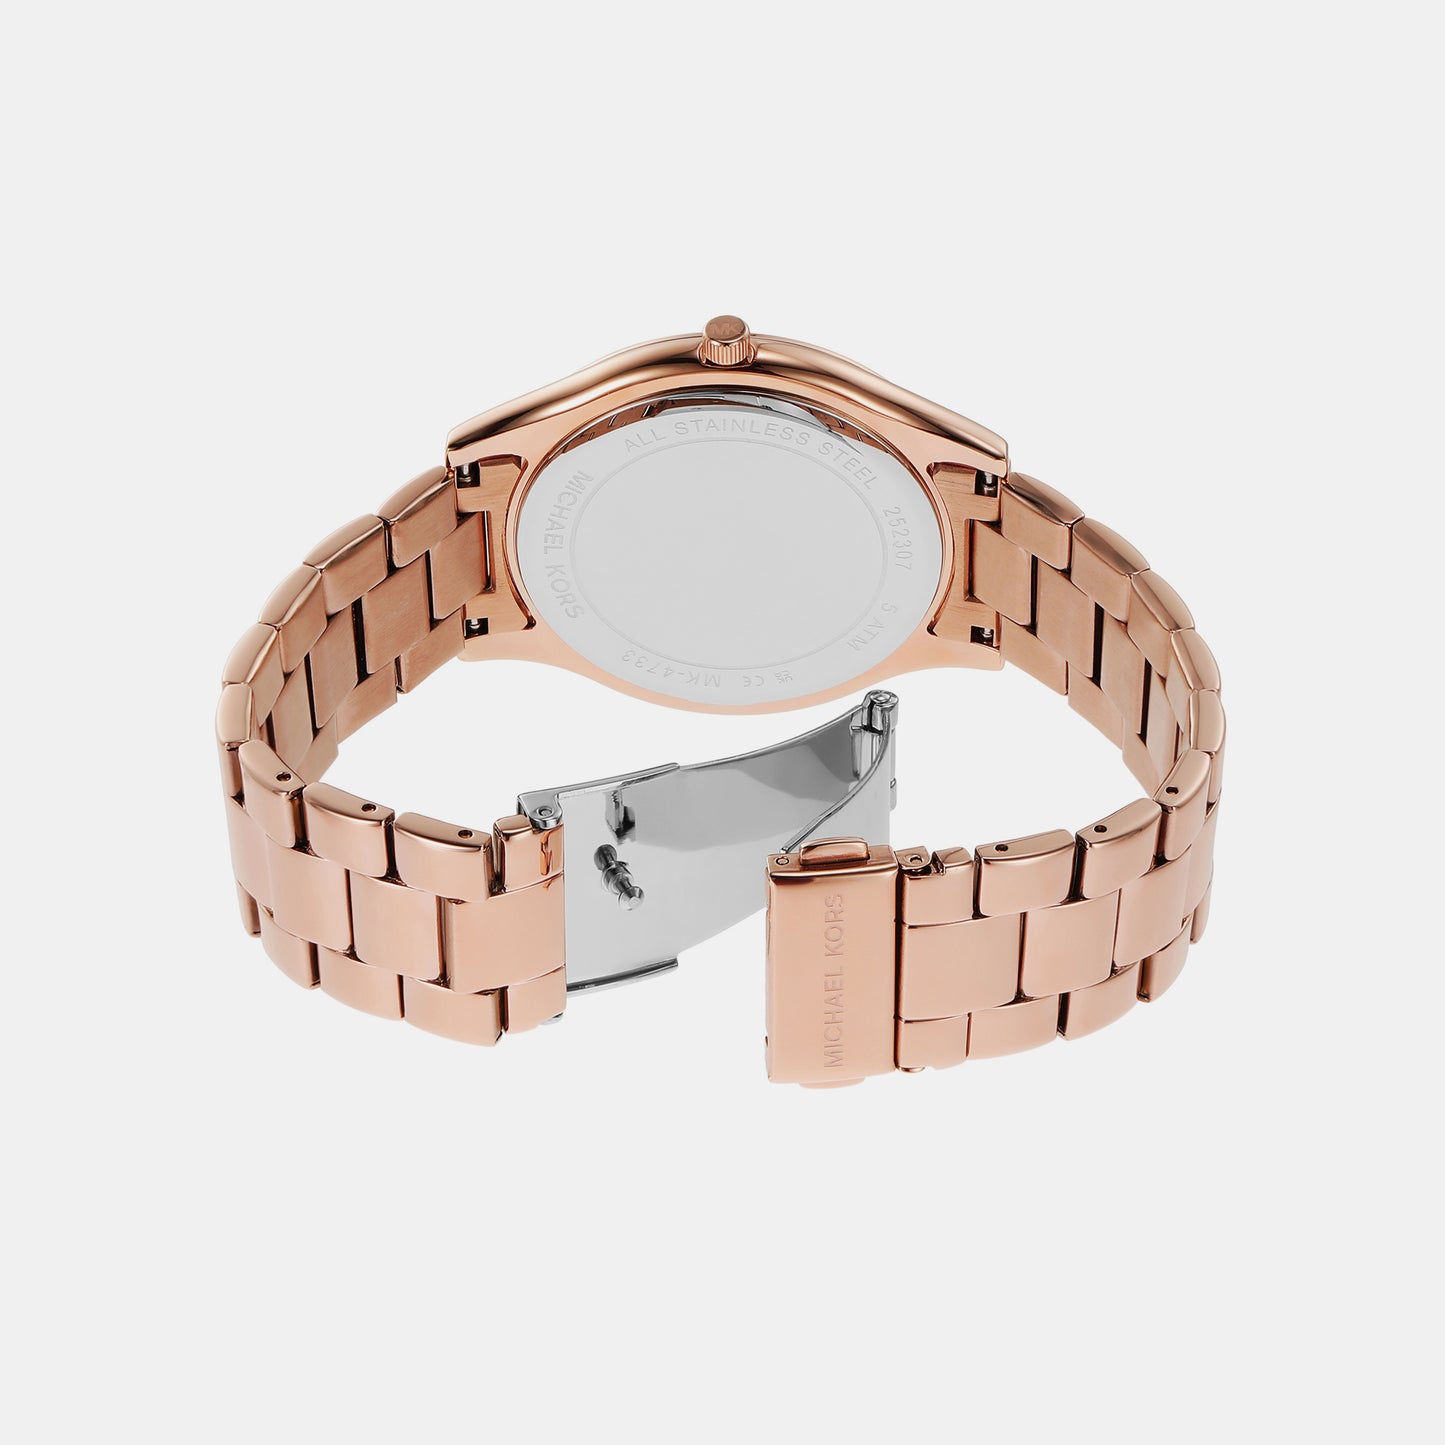 Female Rose Gold Analog Stainless Steel Watch MK4733